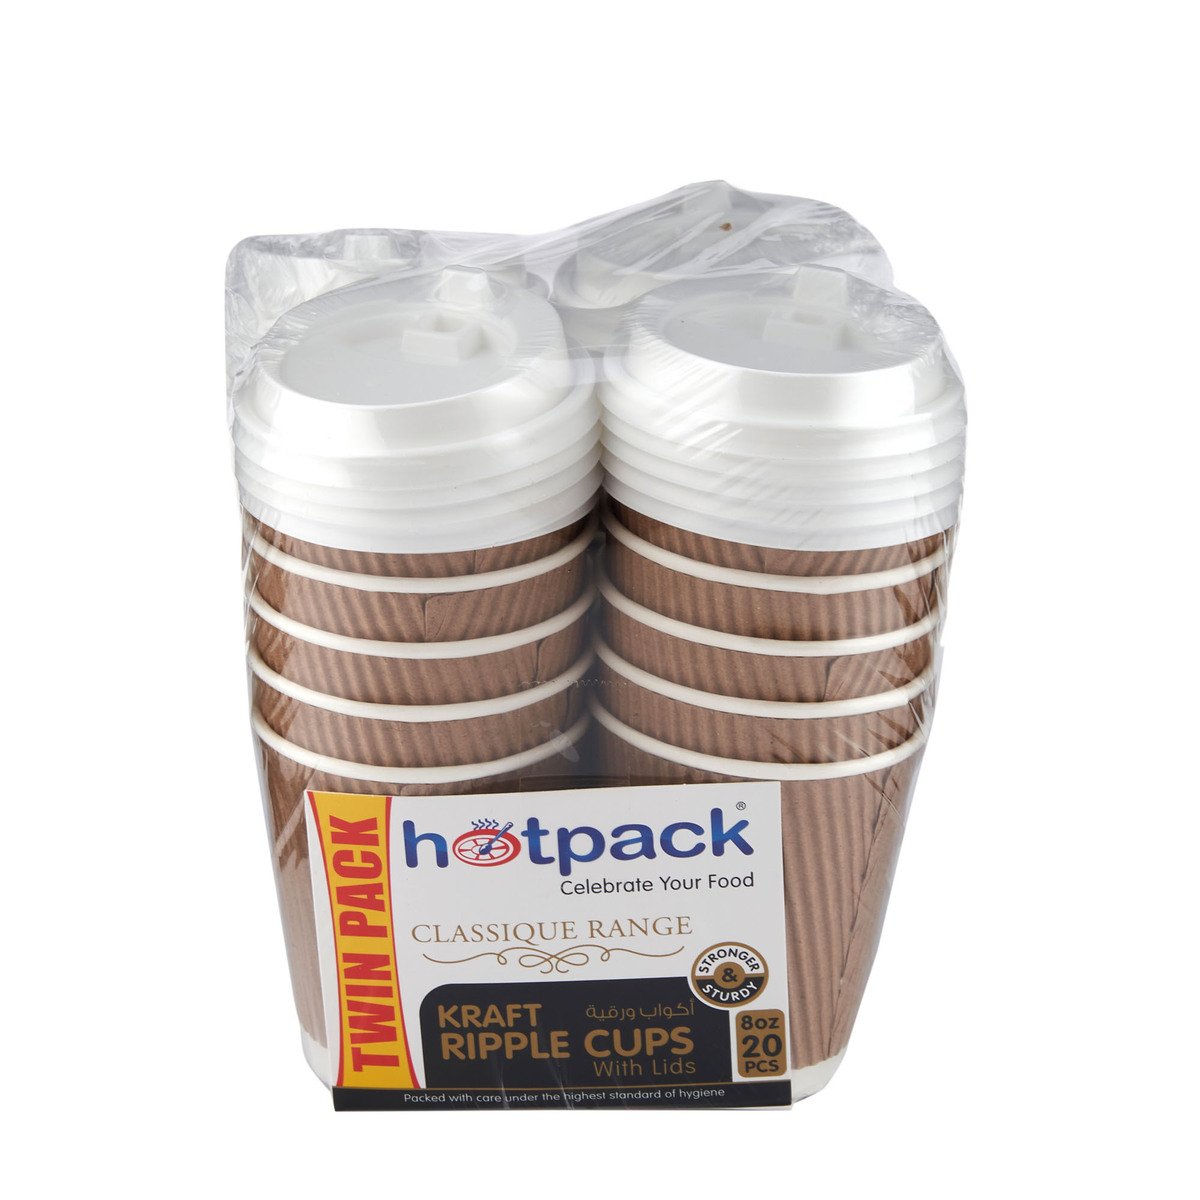 Hotpack Kraft Ripple Cups With Lids Size 8oz 20pcs